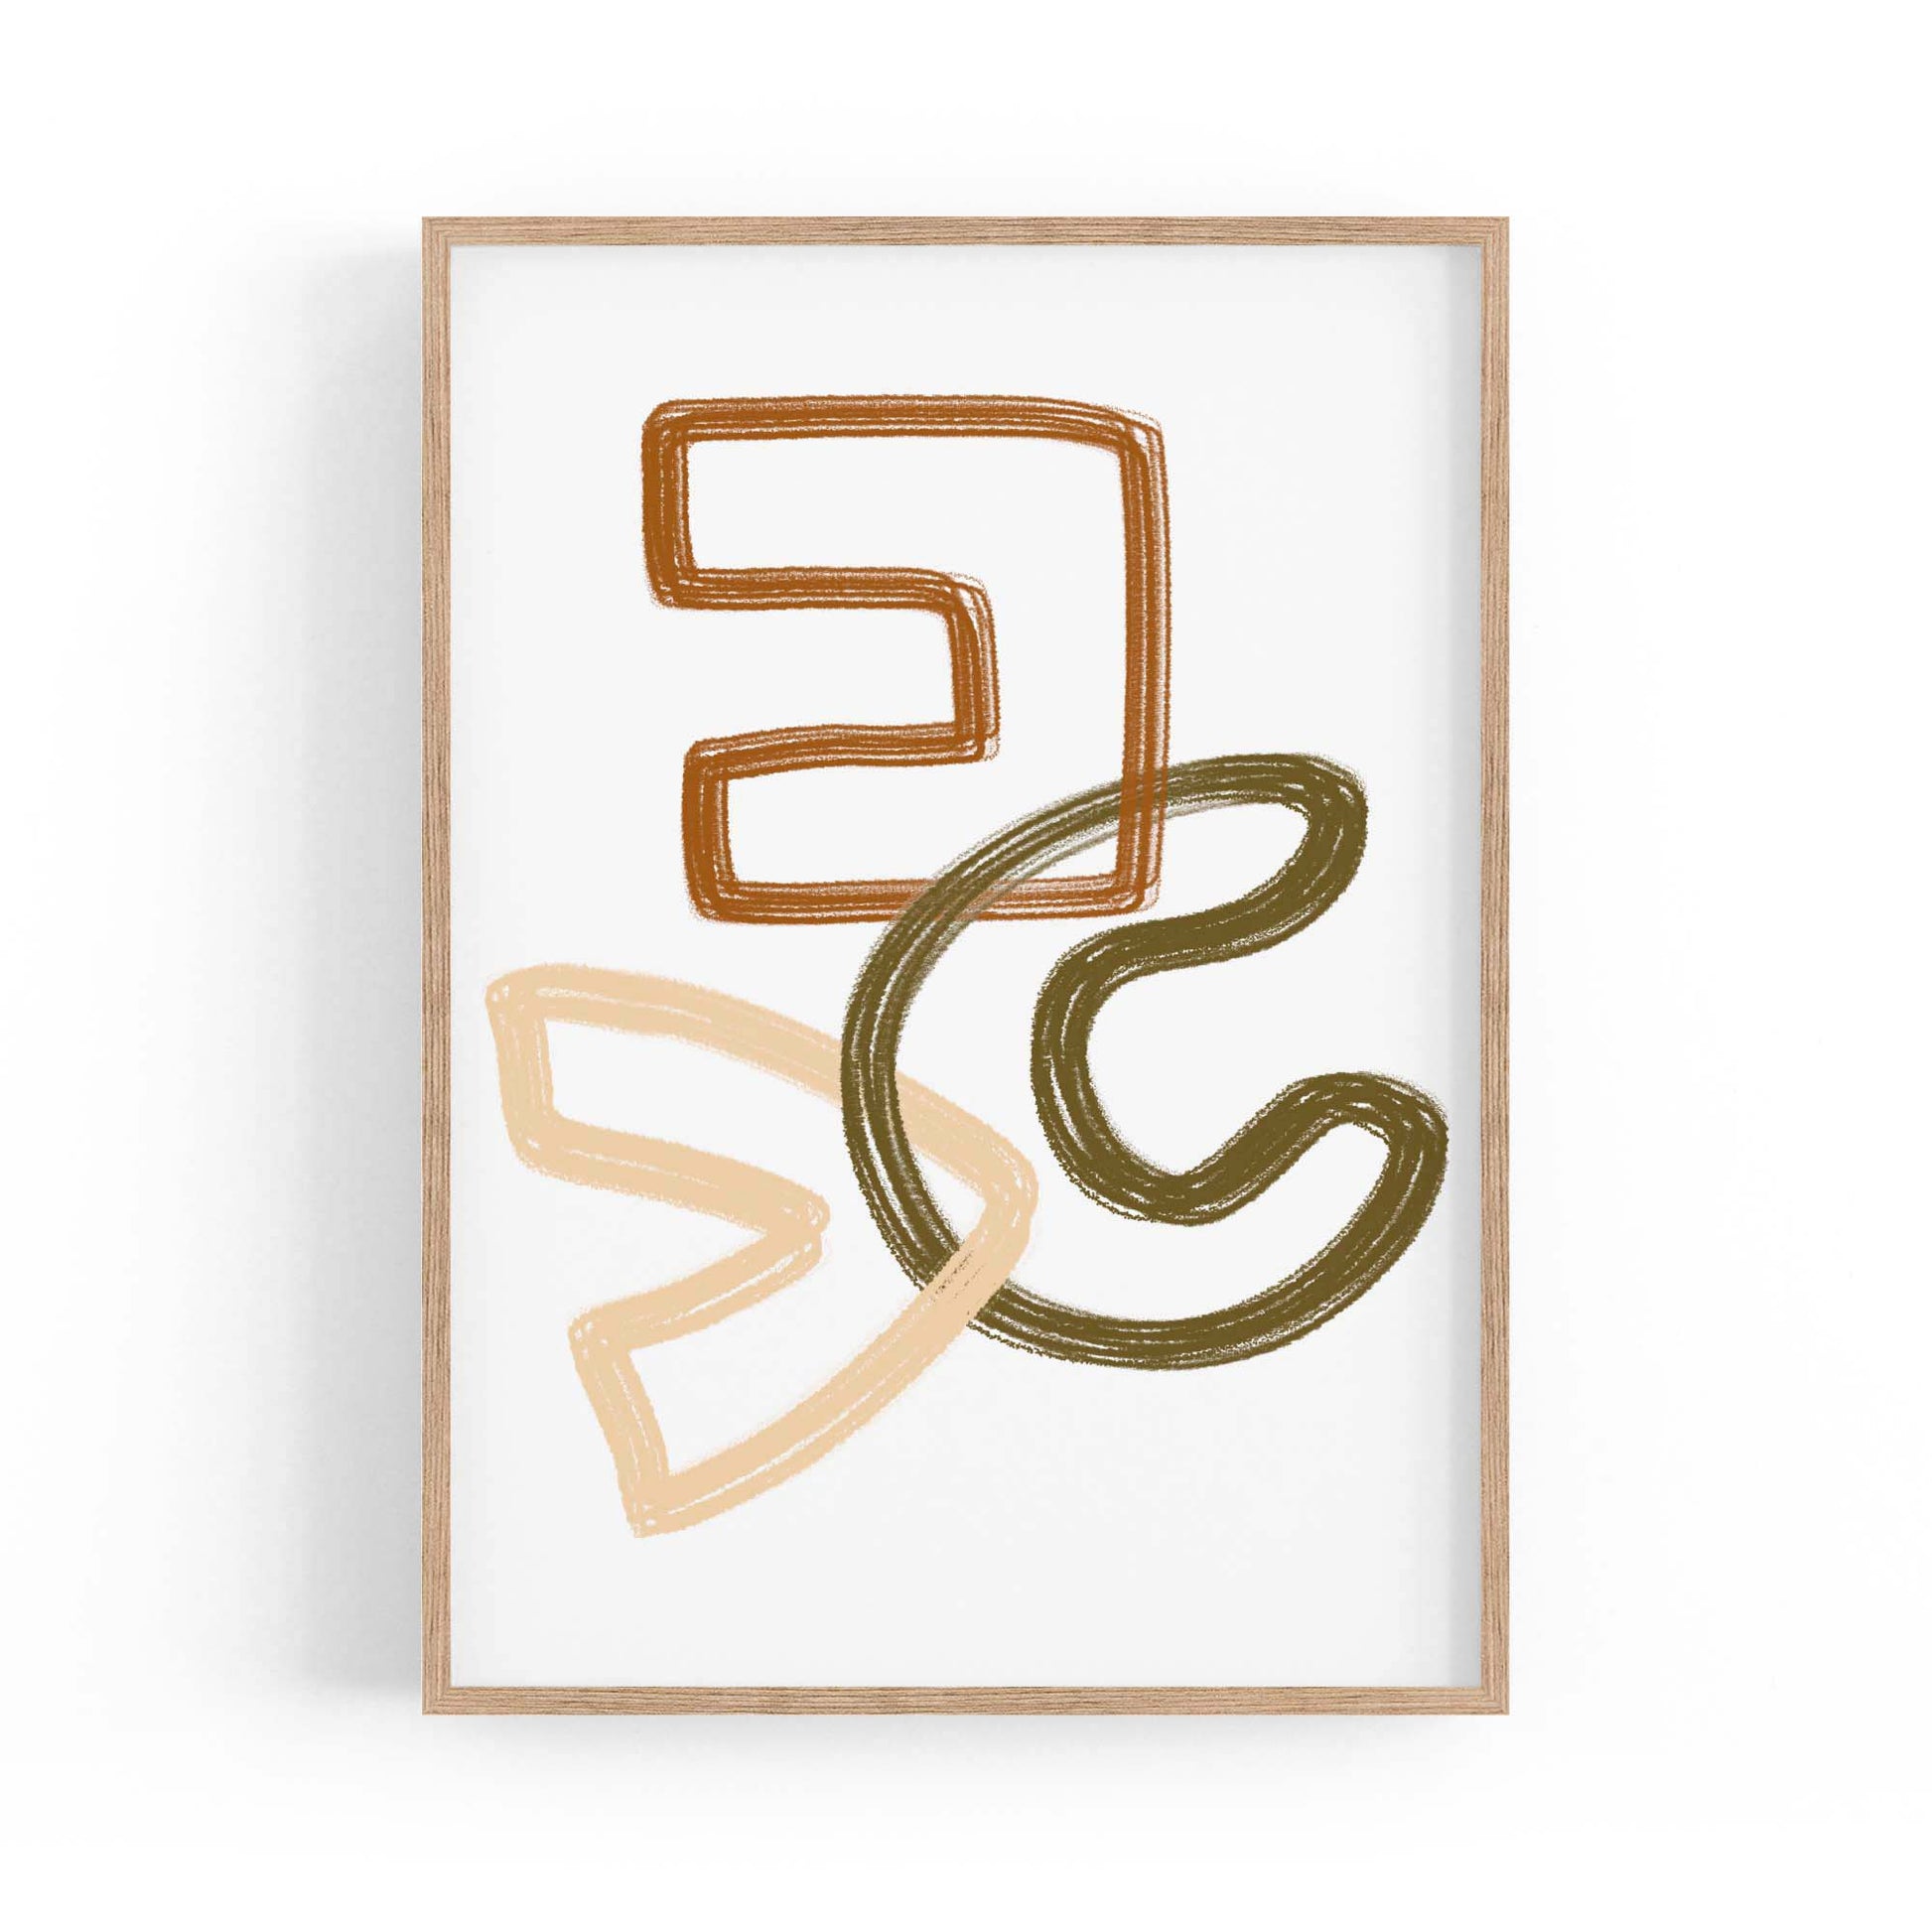 Modern Minimal Abstract Line Shapes Wall Art - The Affordable Art Company